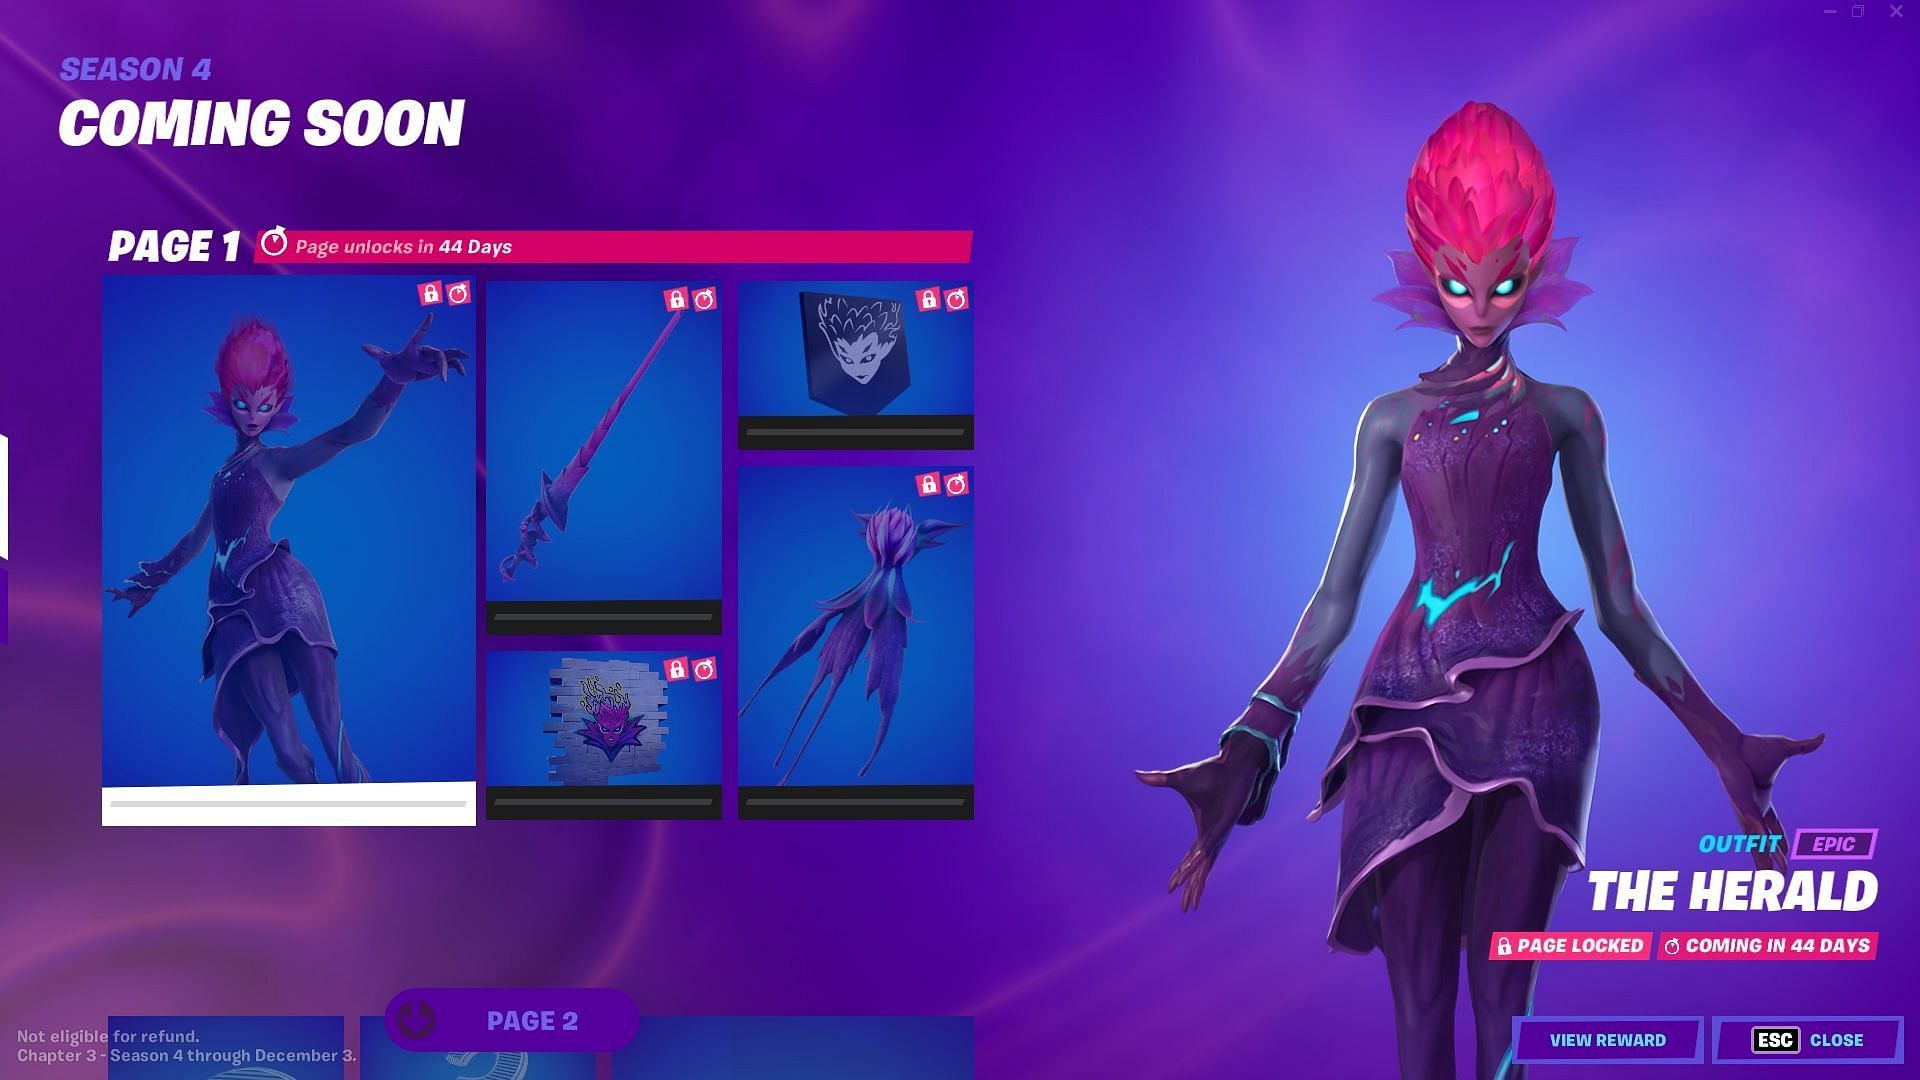 The upcoming Fortnite update will finally make the Herald skin obtainable (Image via Epic Games)